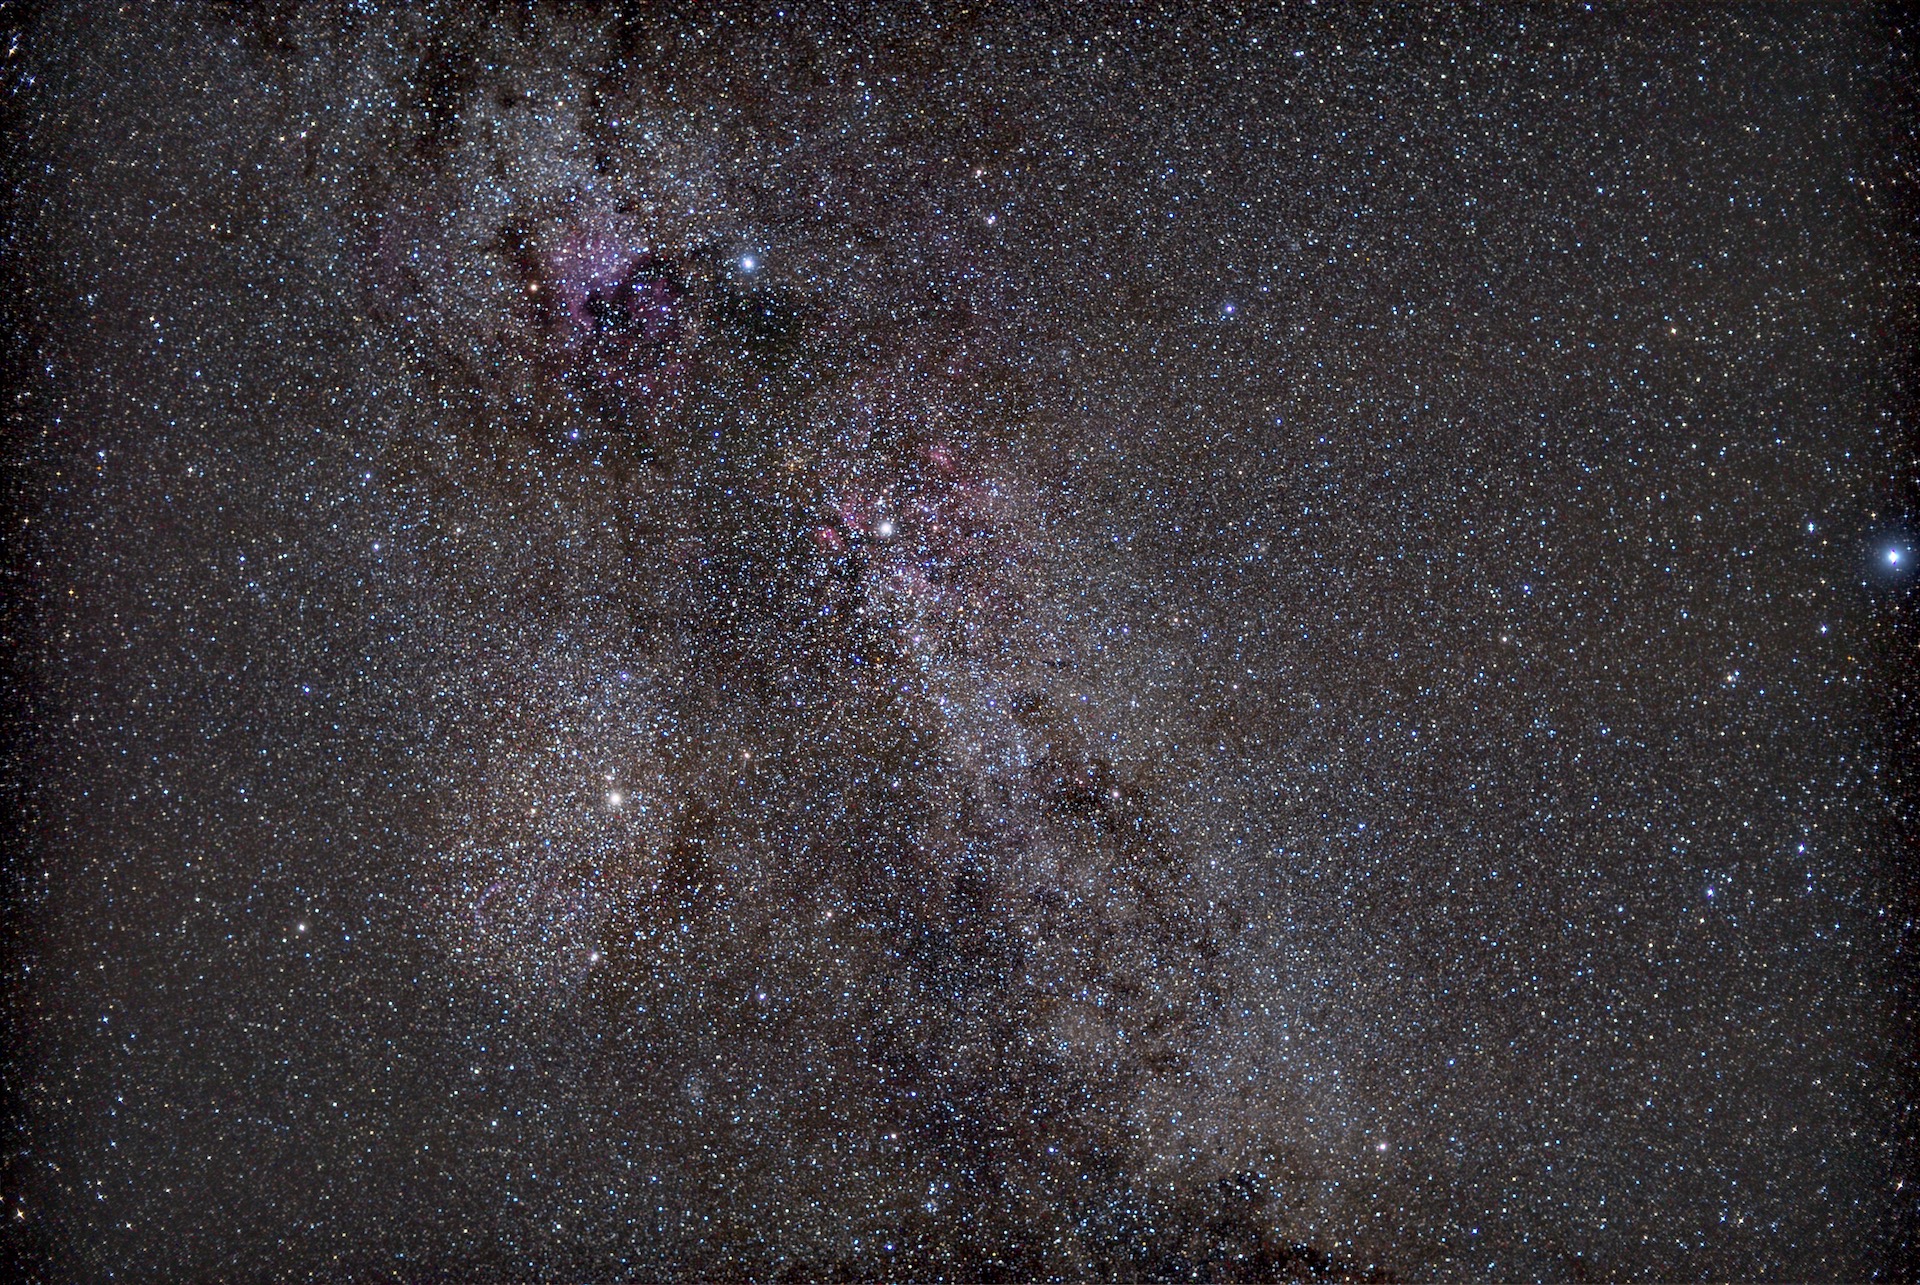 Summer Milky Way in the constellation of Cygnus with countless deep sky objects. Exposure 50x60 seconds, stacking with Sequator, and image editing with Adobe Photoshop. Photo: Marcus Schenk and Sebastian Brummer